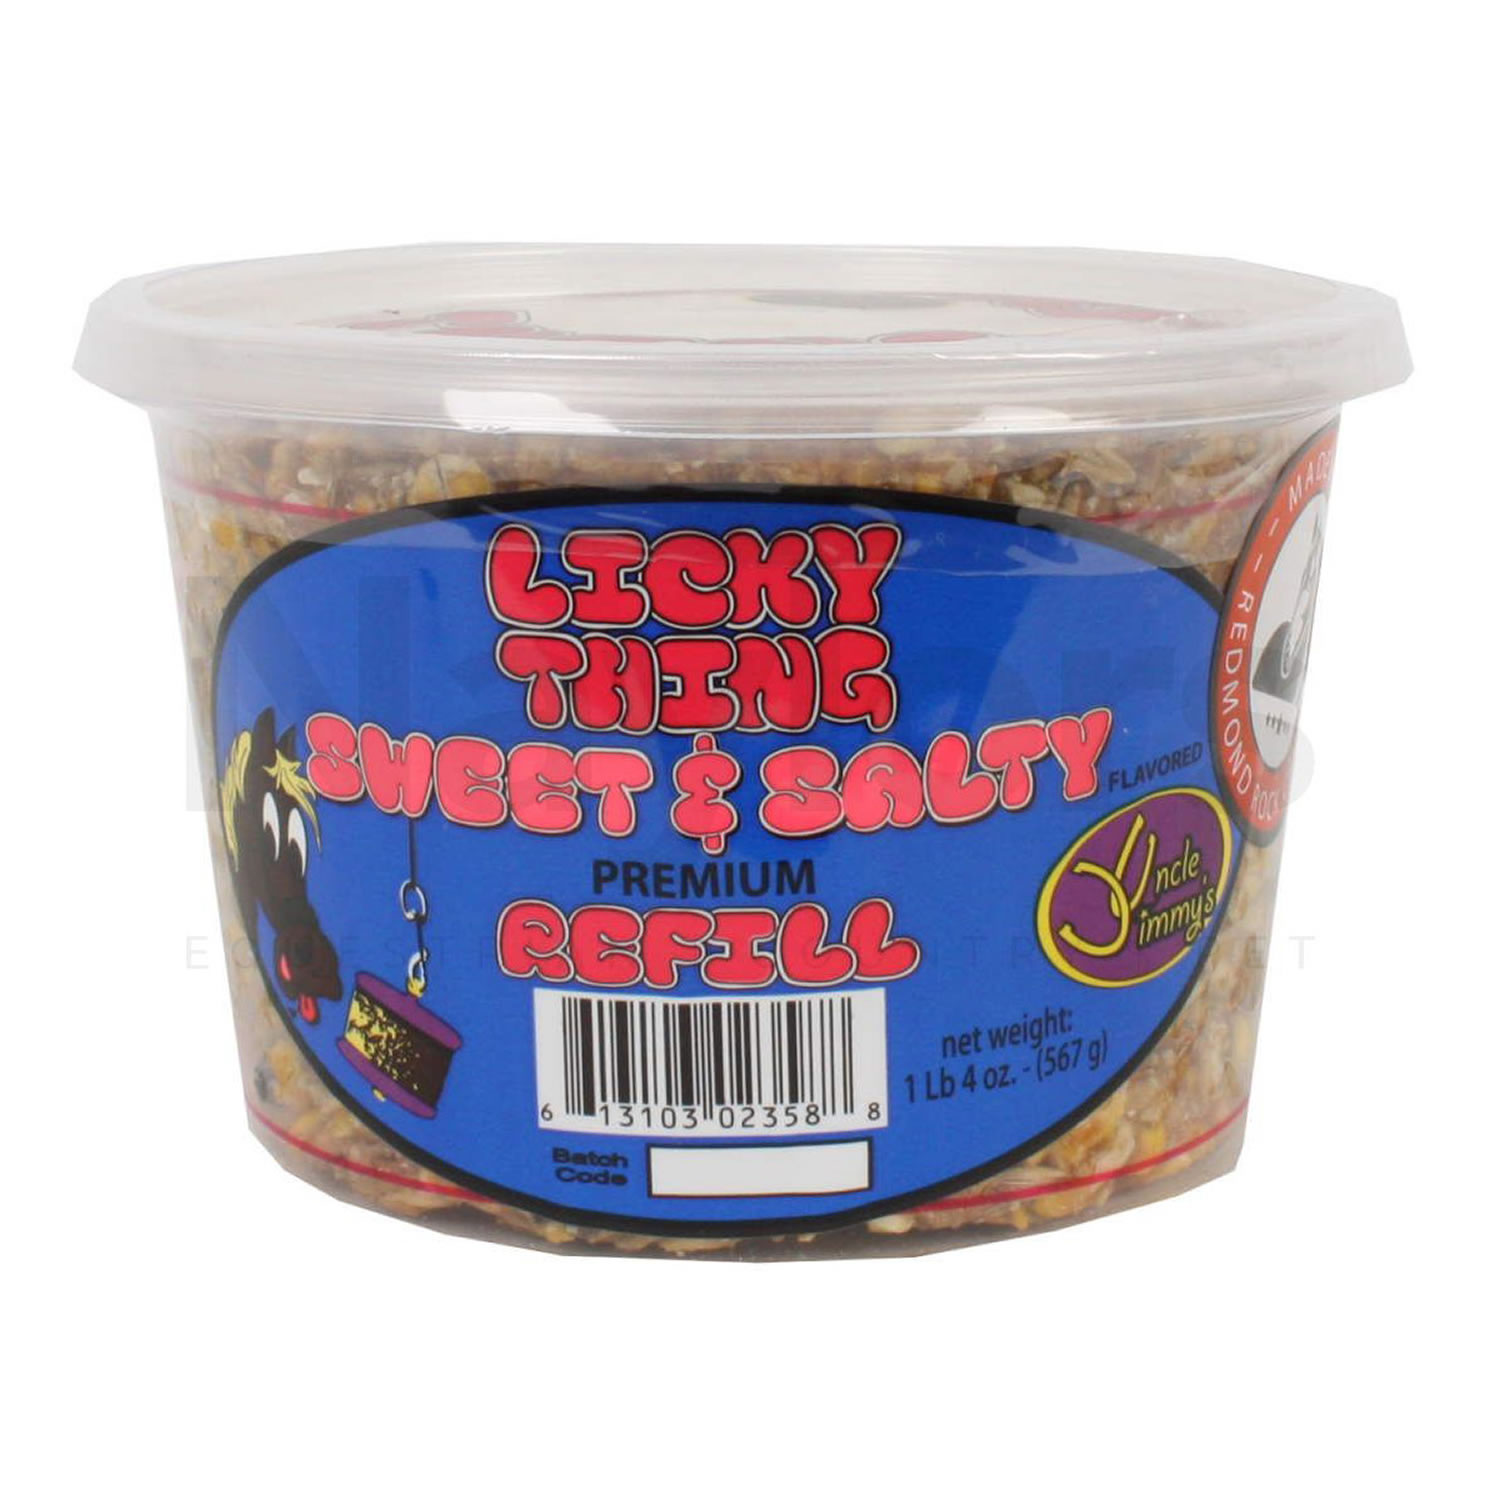 UNCLE JIMMYS LICKY THING SWEET & SALTY  SWEET & SALTY